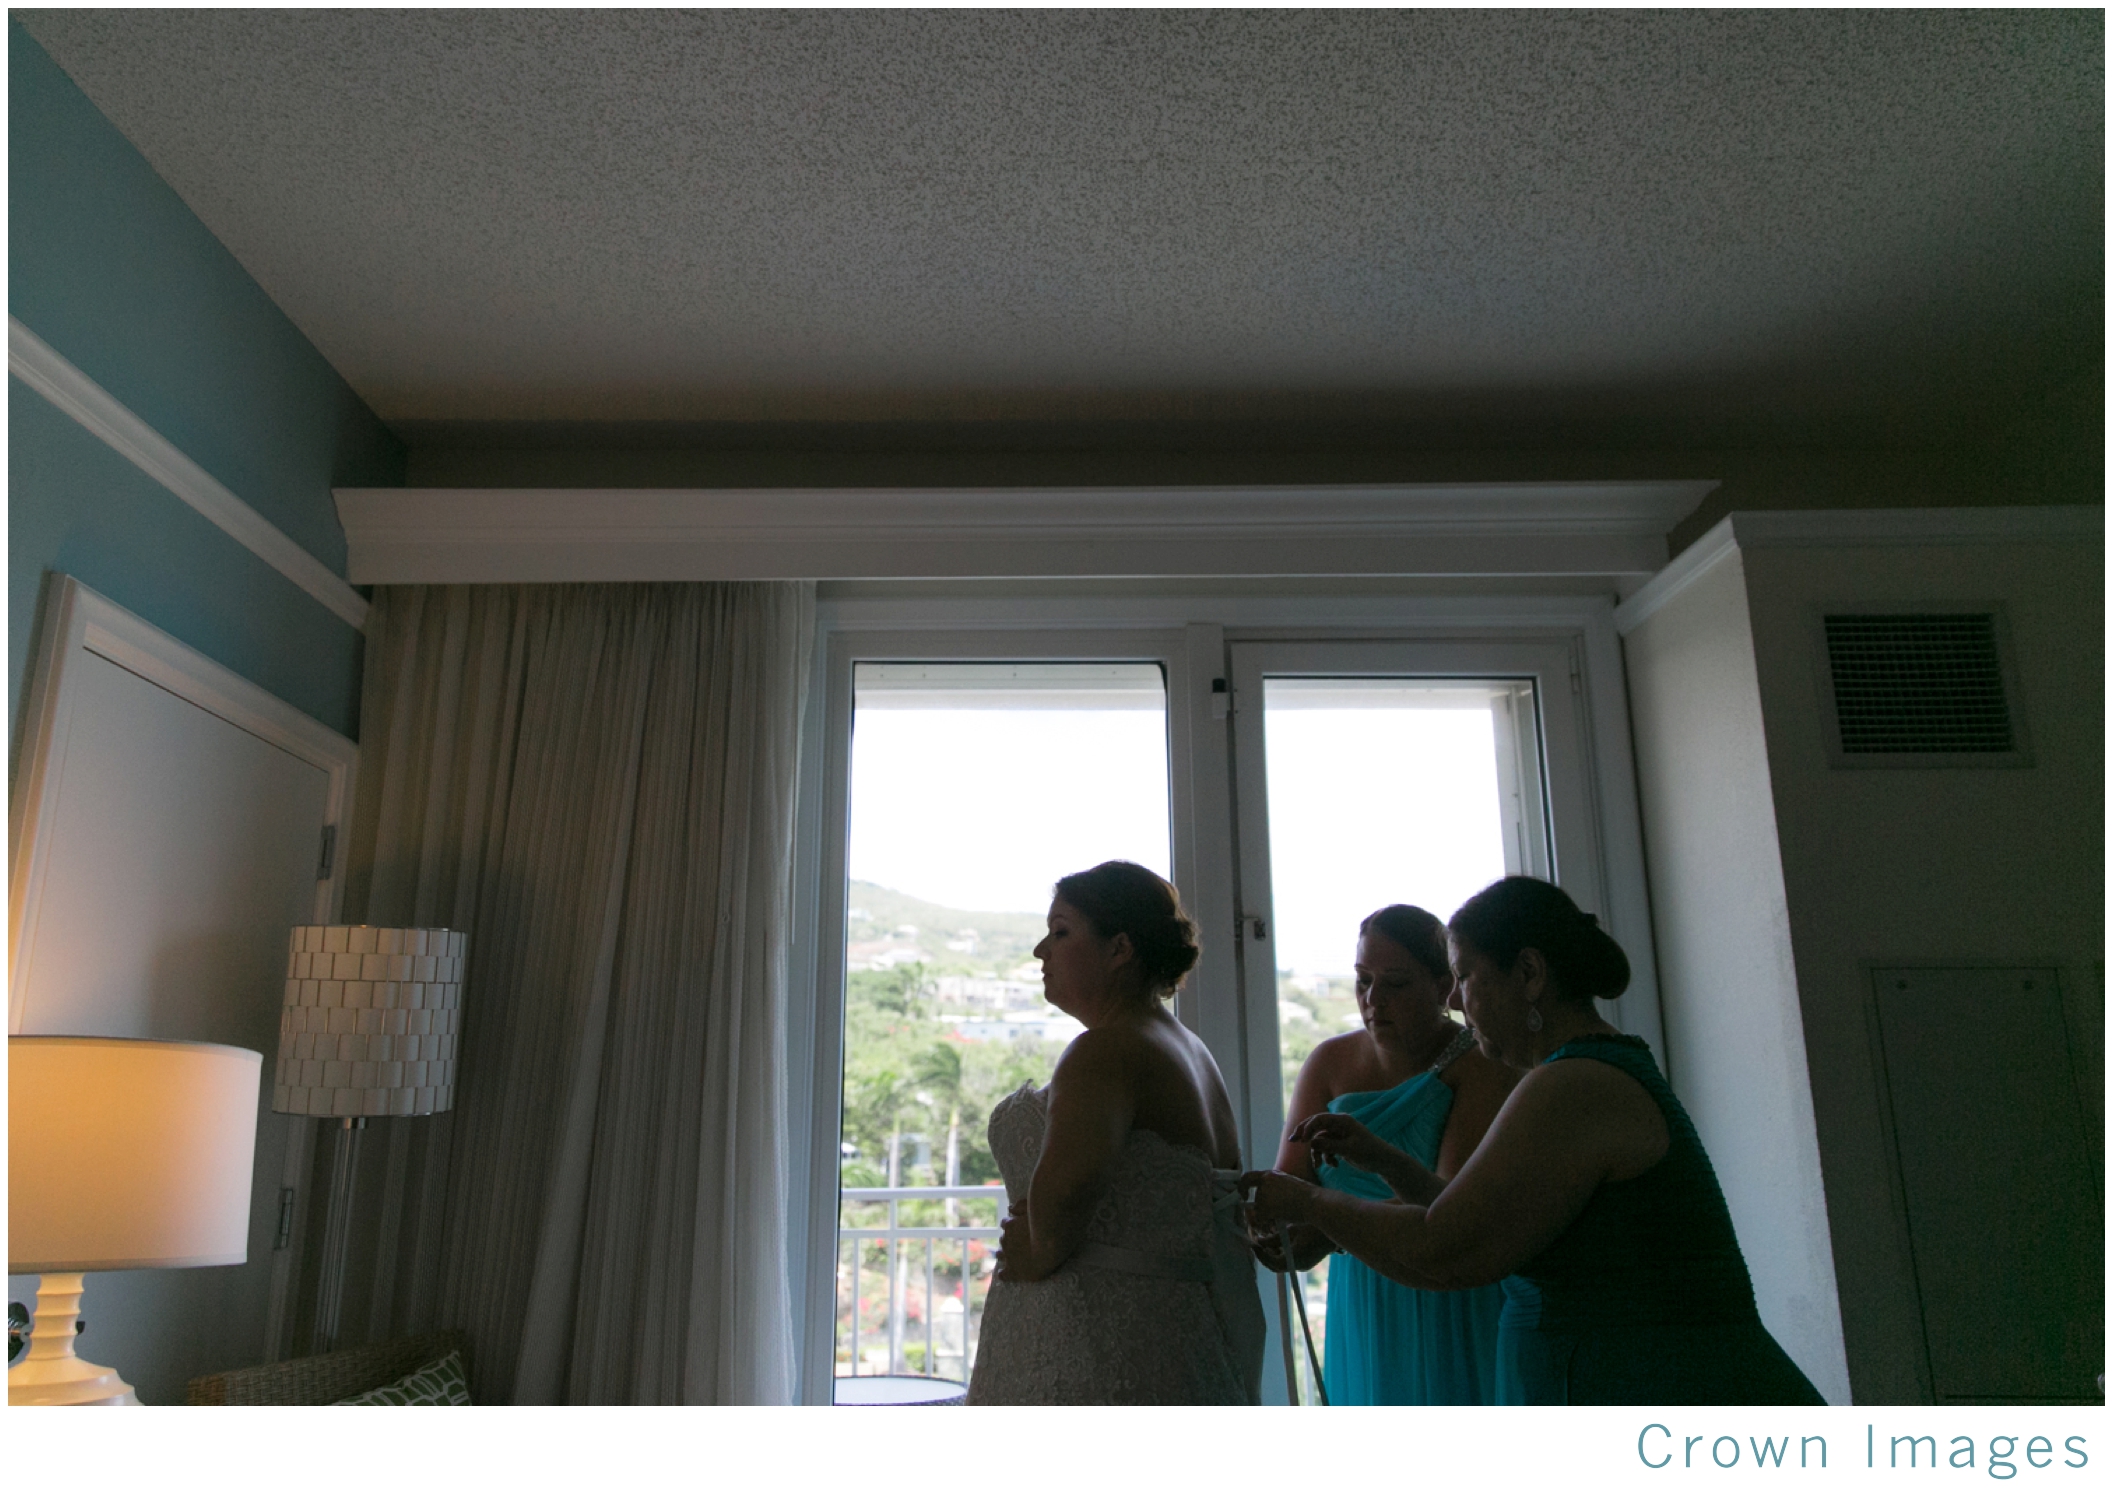 st thomas wedding photos at the marriott crown images_1698.jpg